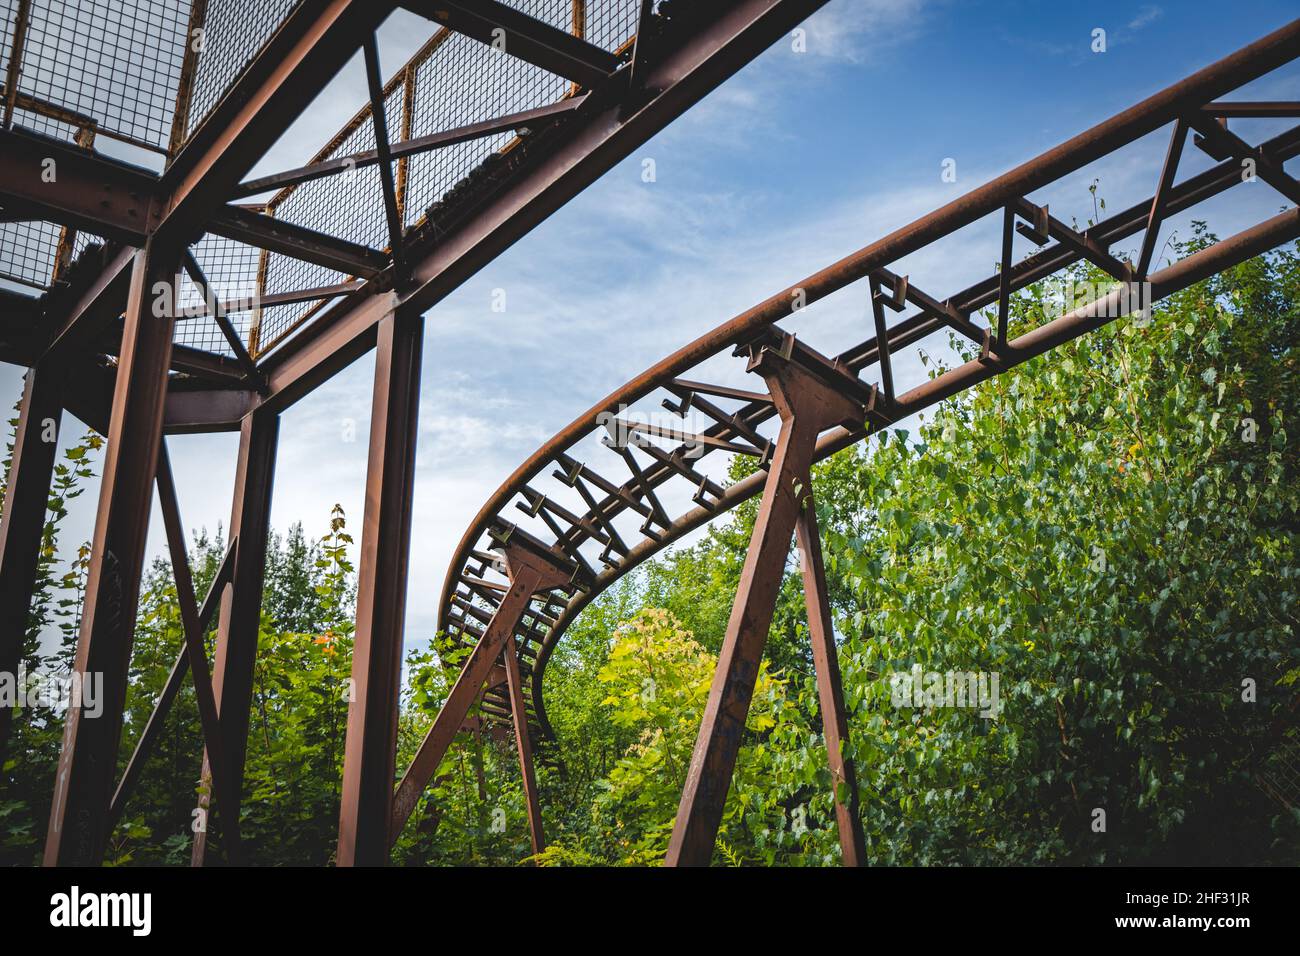 abandoned old rollercoaster in old amusement park in berlin spreepark lost place Stock Photo